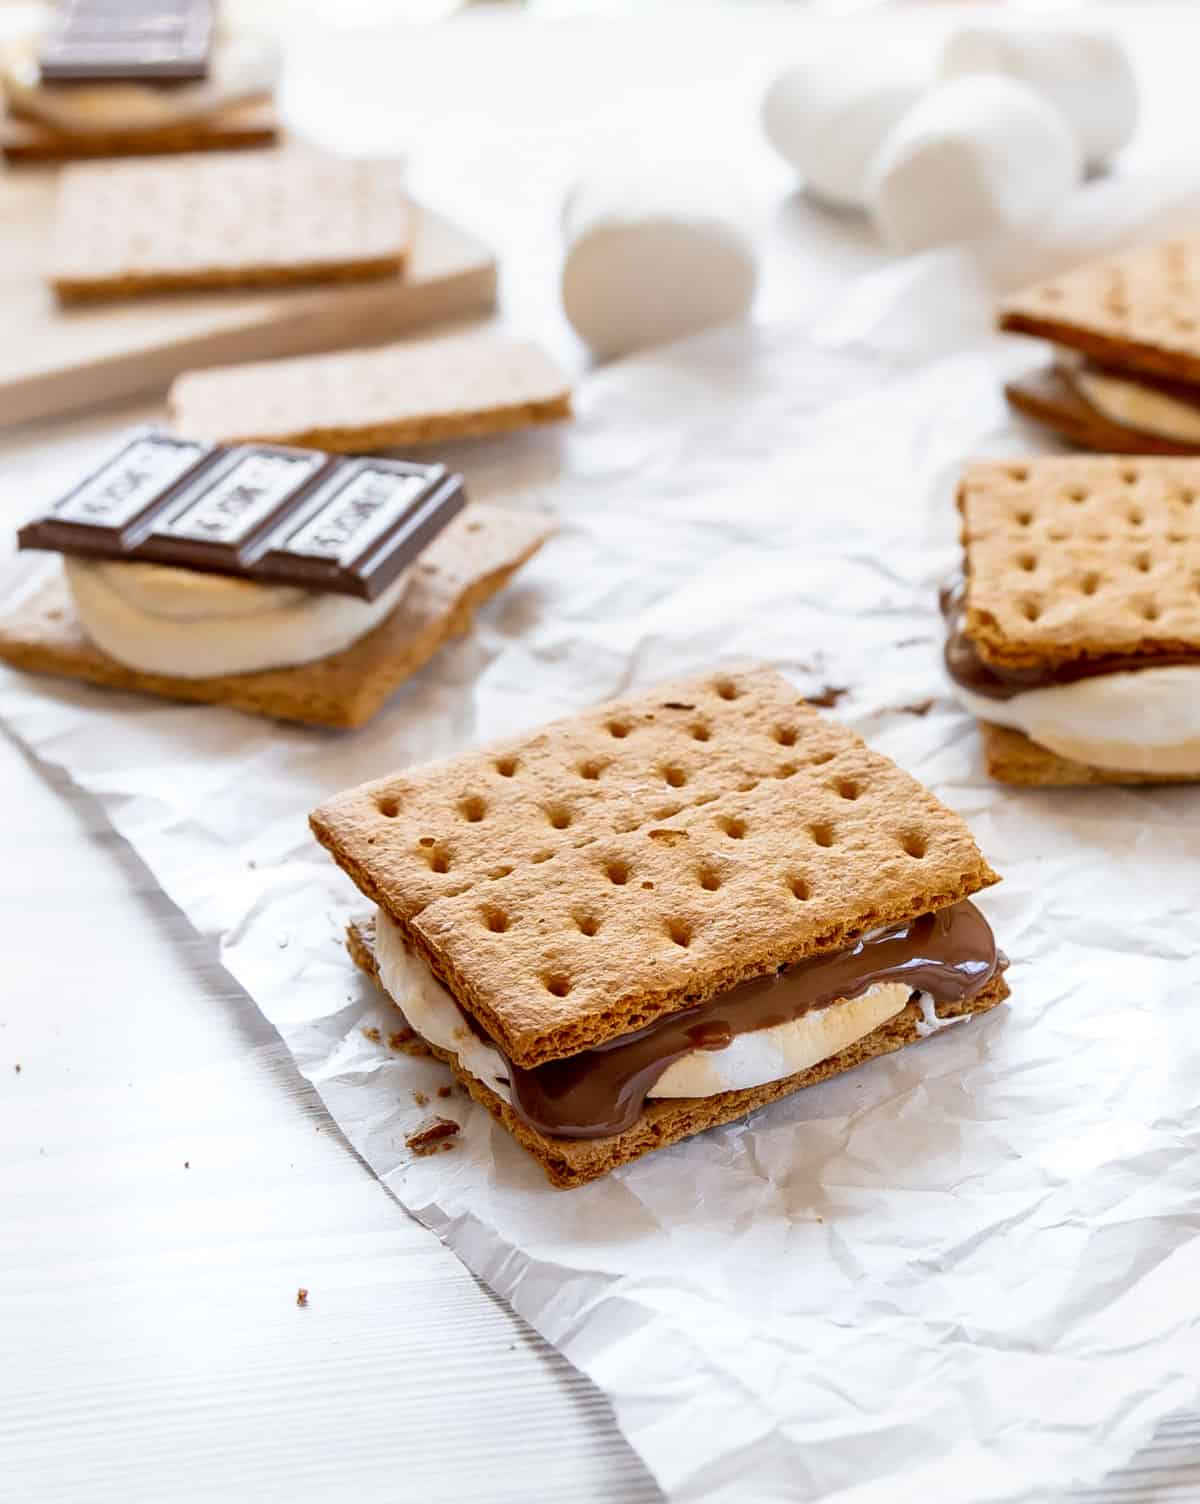 S'more with melted chocolate and marshmallow